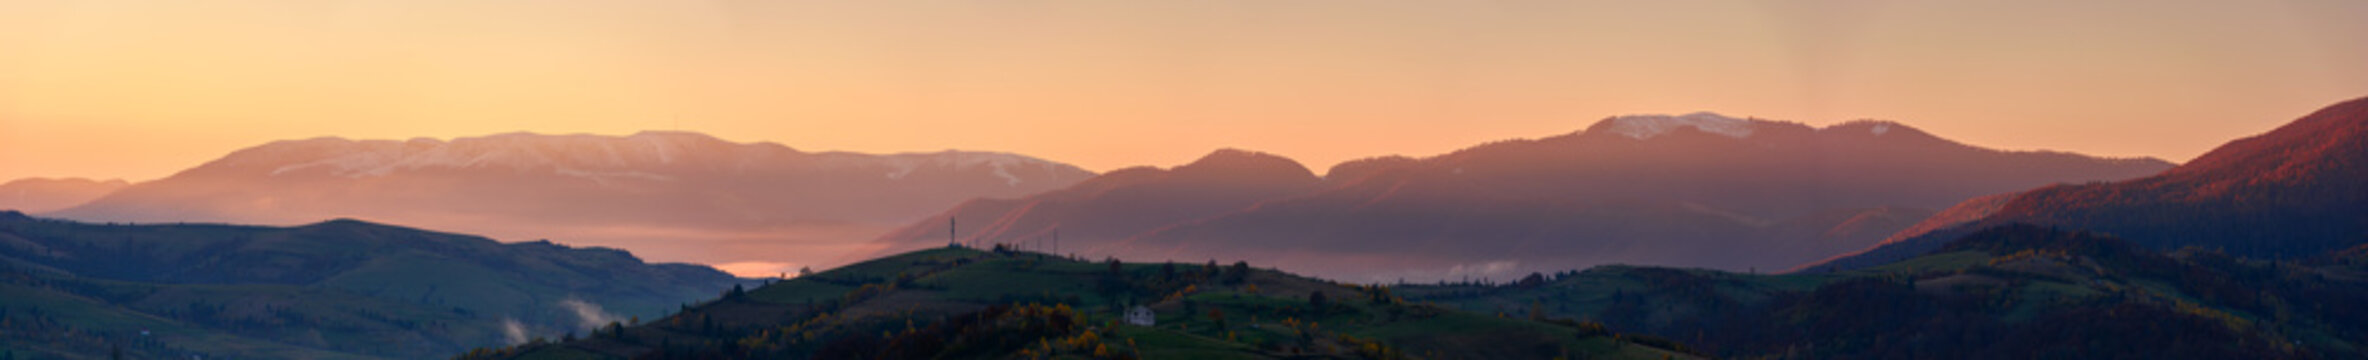 panorama of mountainous countryside at dawn. hills with trees and rural fields rolling down into the foggy valley. distant ridge with snow capped tops beneath a sky with clouds in red morning light